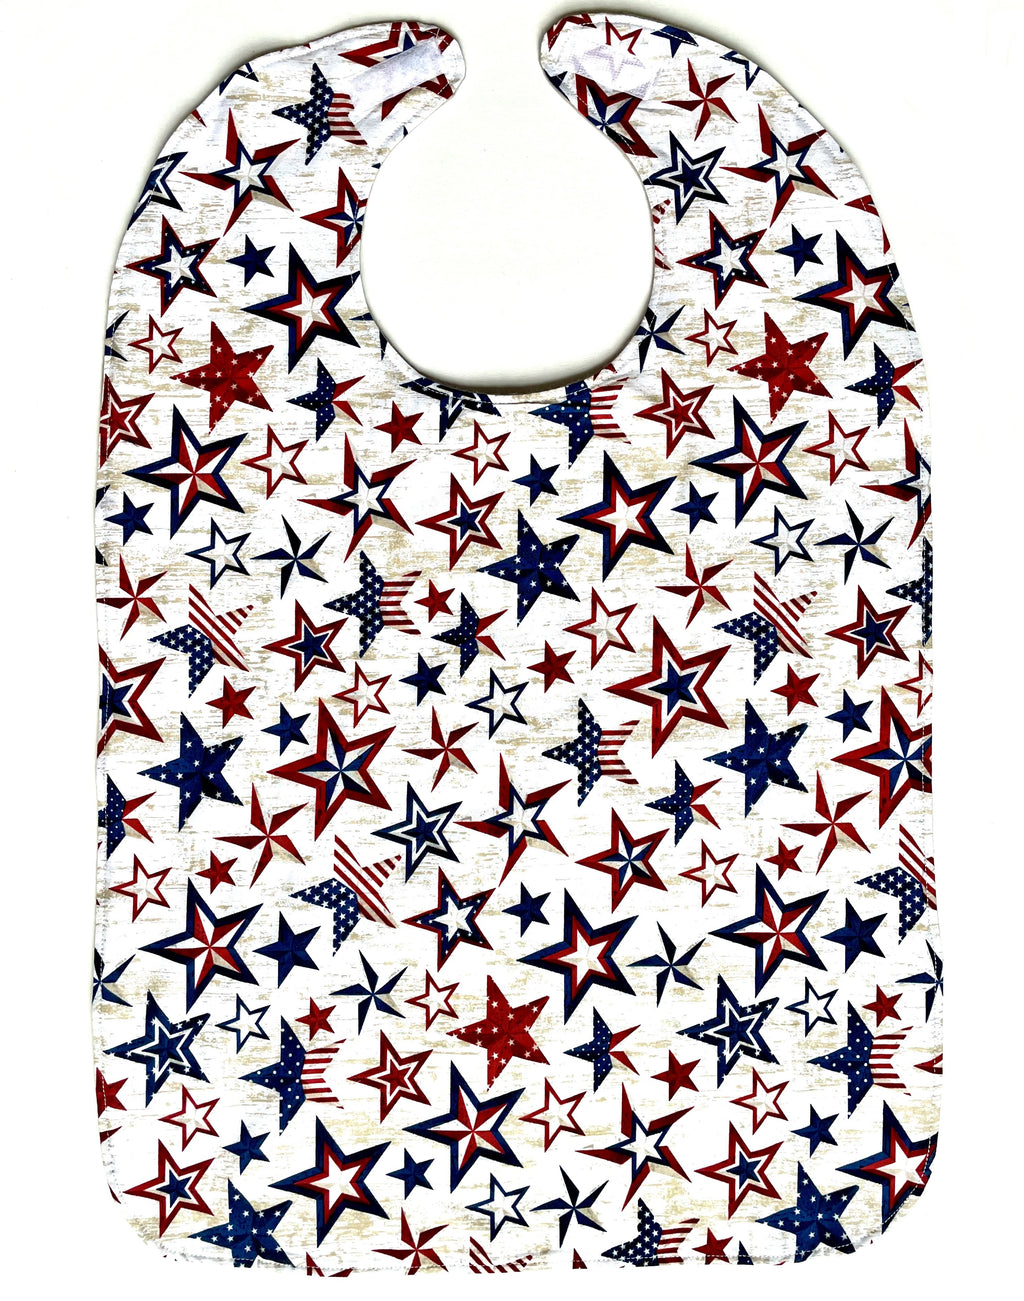 BAVETTE adult bib with red, white and blue stars on three layers of machine washable premium cotton, Velcro back closure, 26" x 17" 